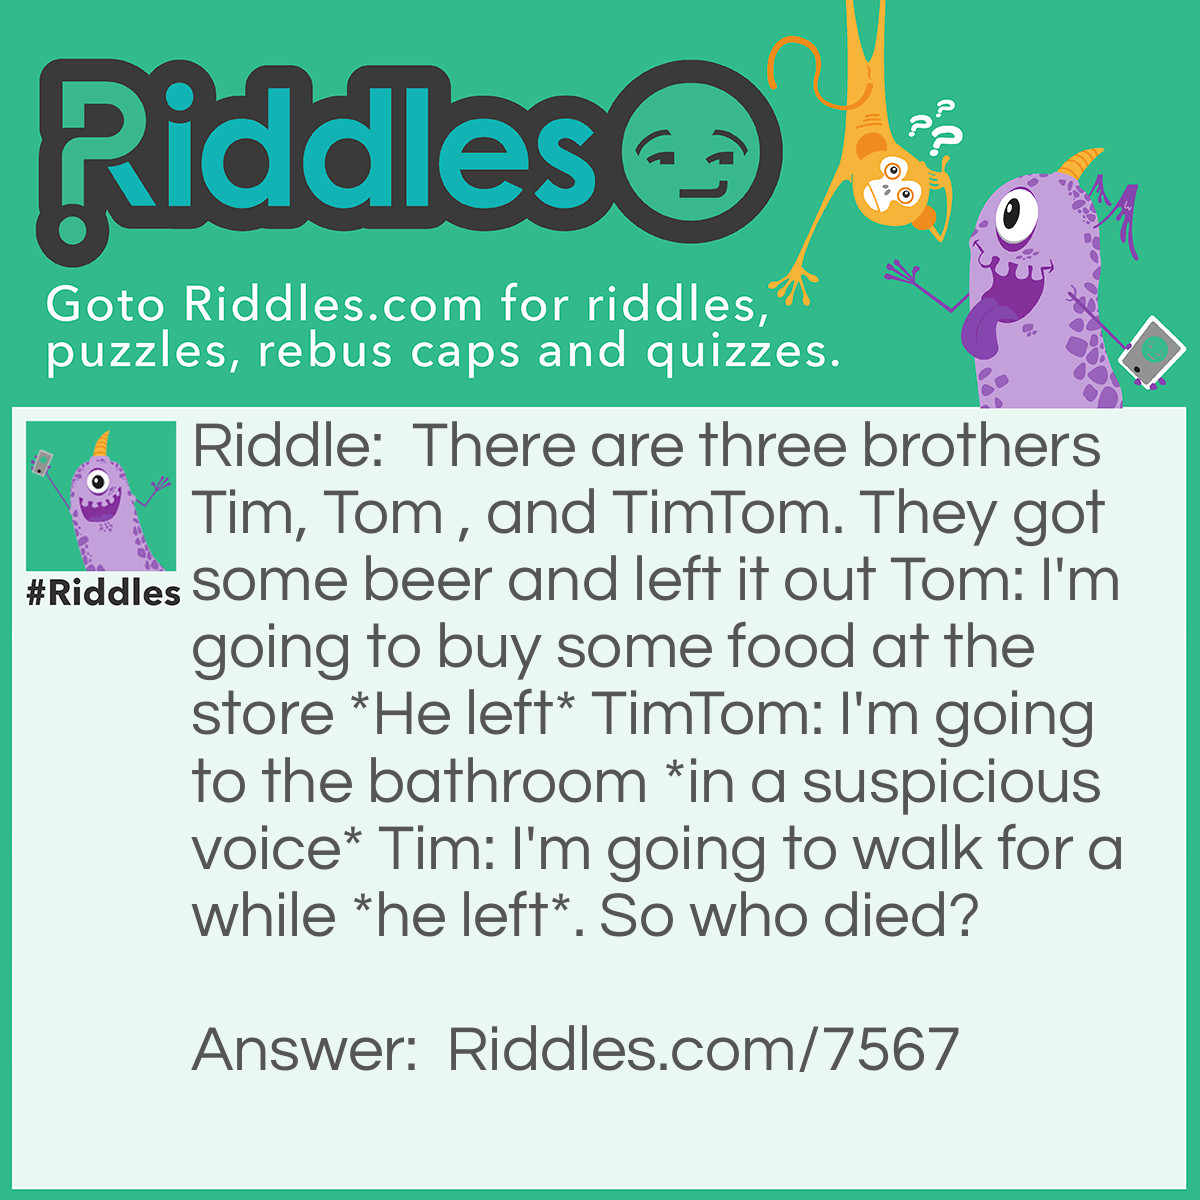 Riddle: There are three brothers Tim, Tom , and TimTom. They got some beer and left it out Tom: I'm going to buy some food at the store *He left* TimTom: I'm going to the bathroom *in a suspicious voice* Tim: I'm going to walk for a while *he left*. So who died? Answer: TimTom because he never really went to the bathroom and drank the beer and he drank so much he got drunk and died